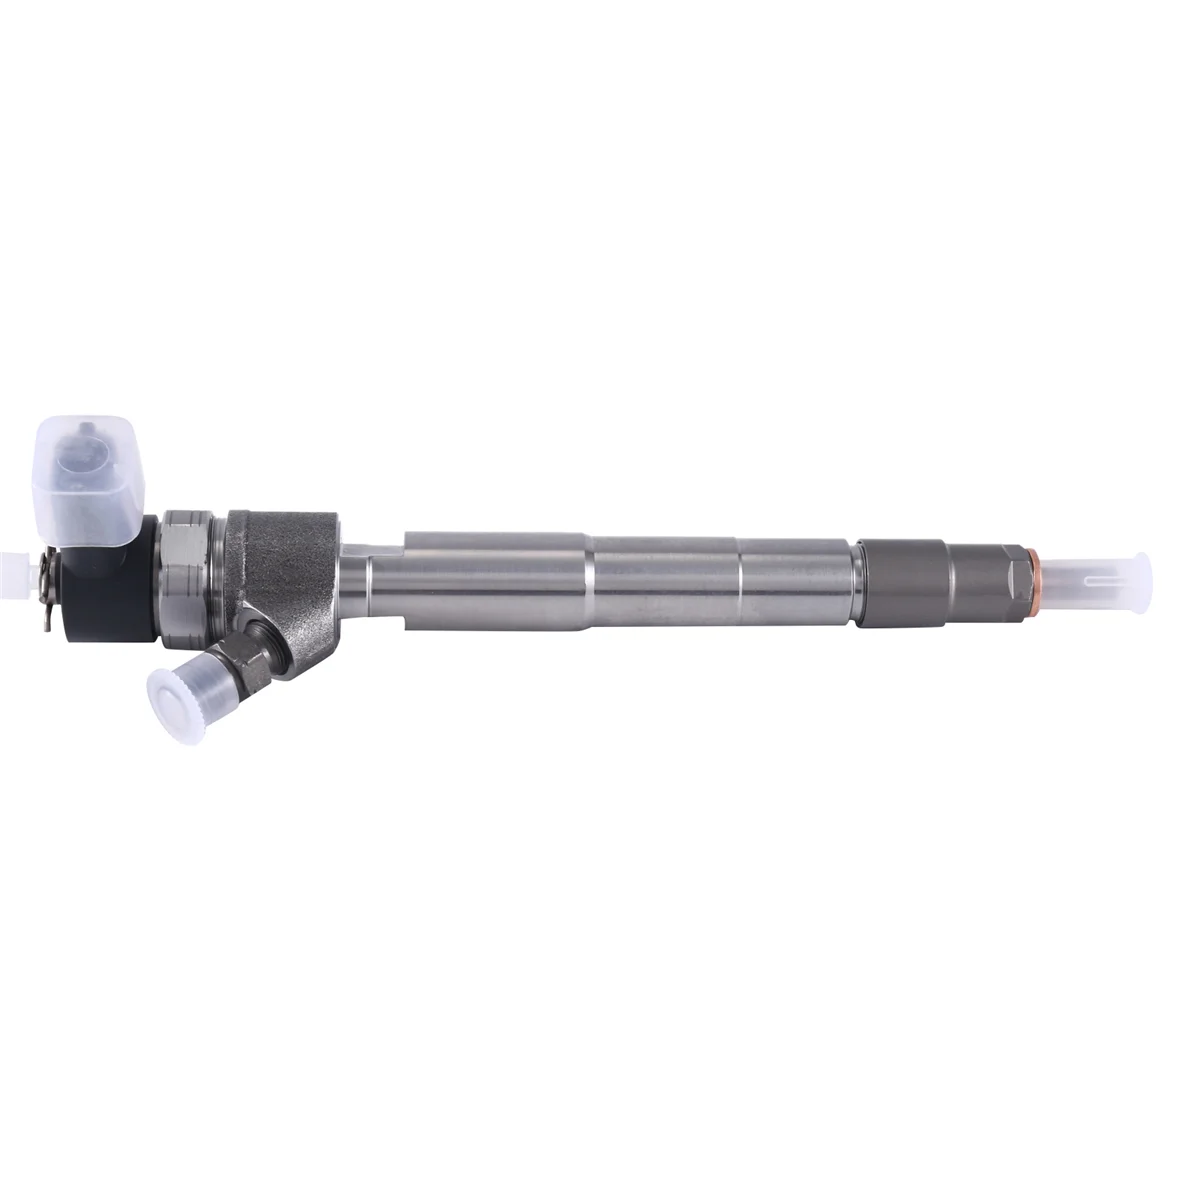 

0445110808 New Common Rail Crude Oil Fuel Injector Nozzle for Bosch for Cummins ISF 2.8 Engine